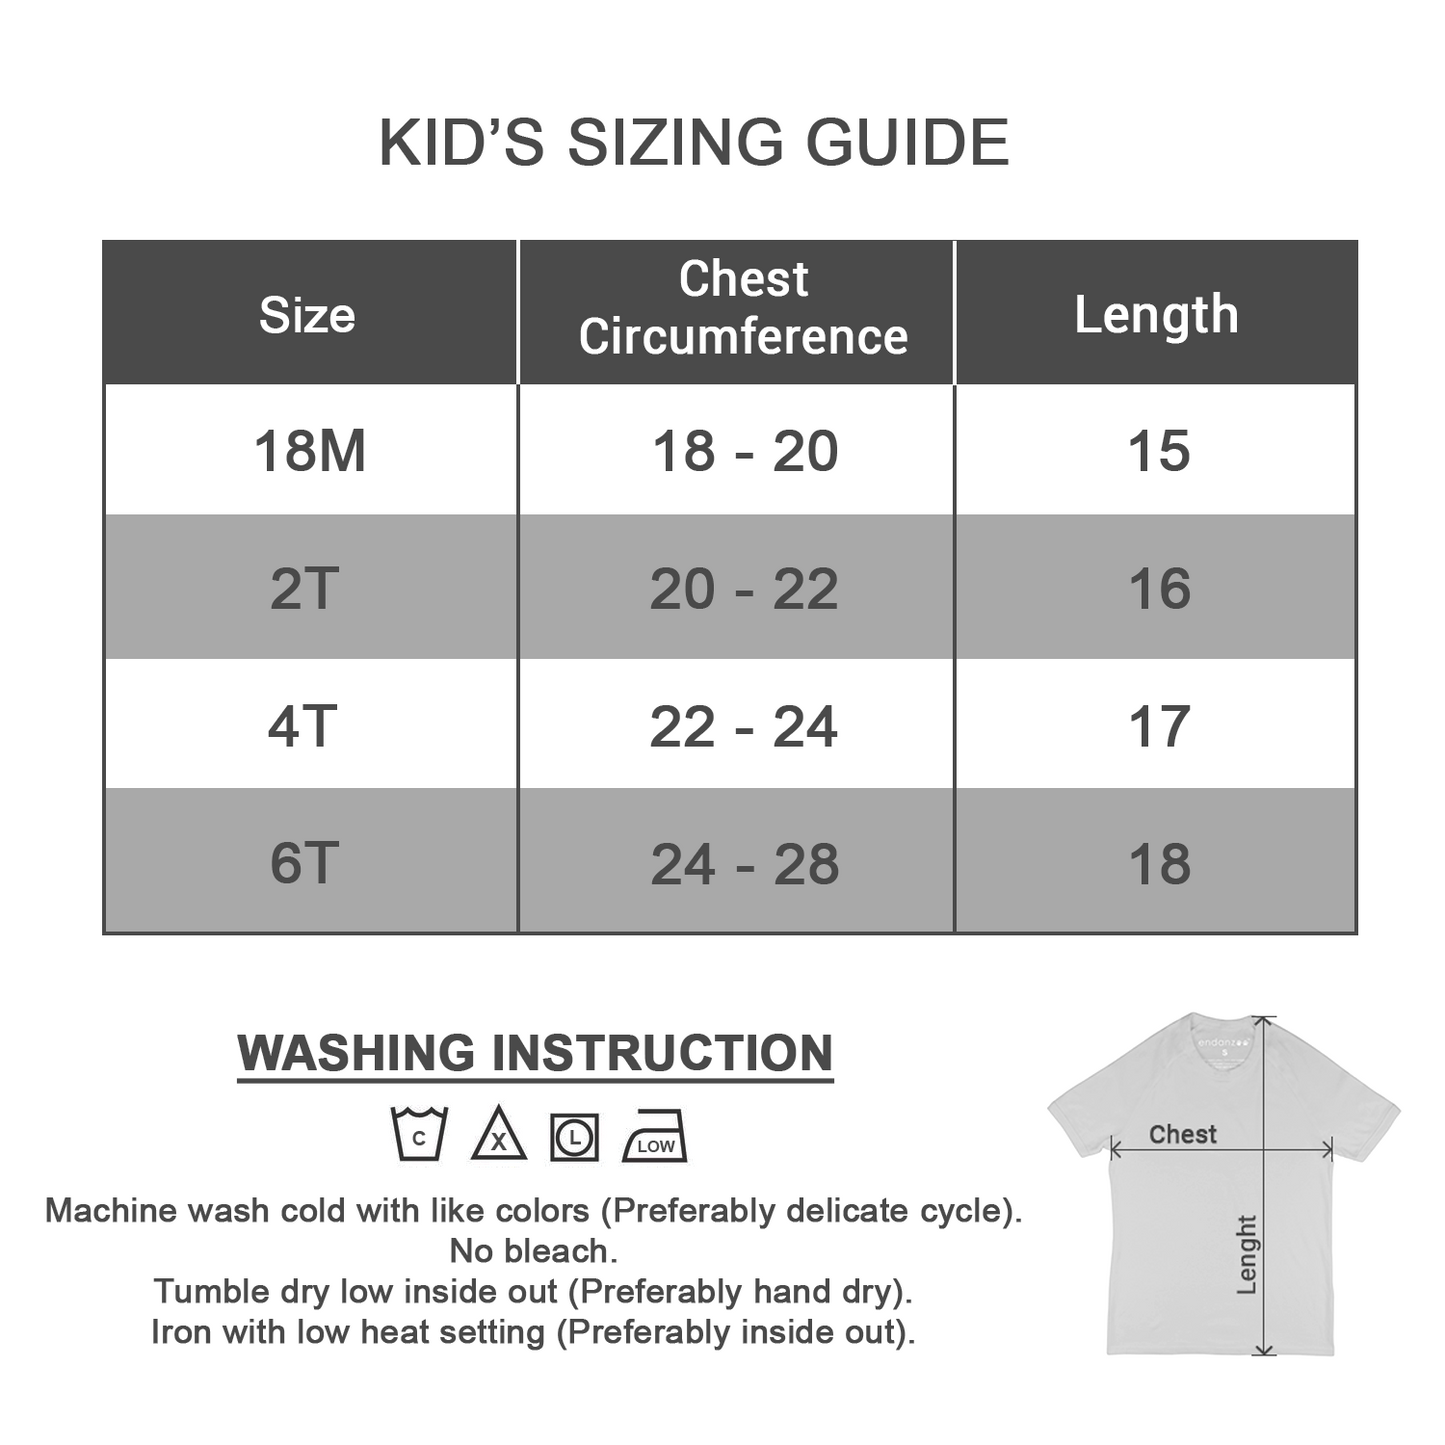 Endanzoo Matching Sibling Organic Kids Outfit - Big Brother & Little Sister